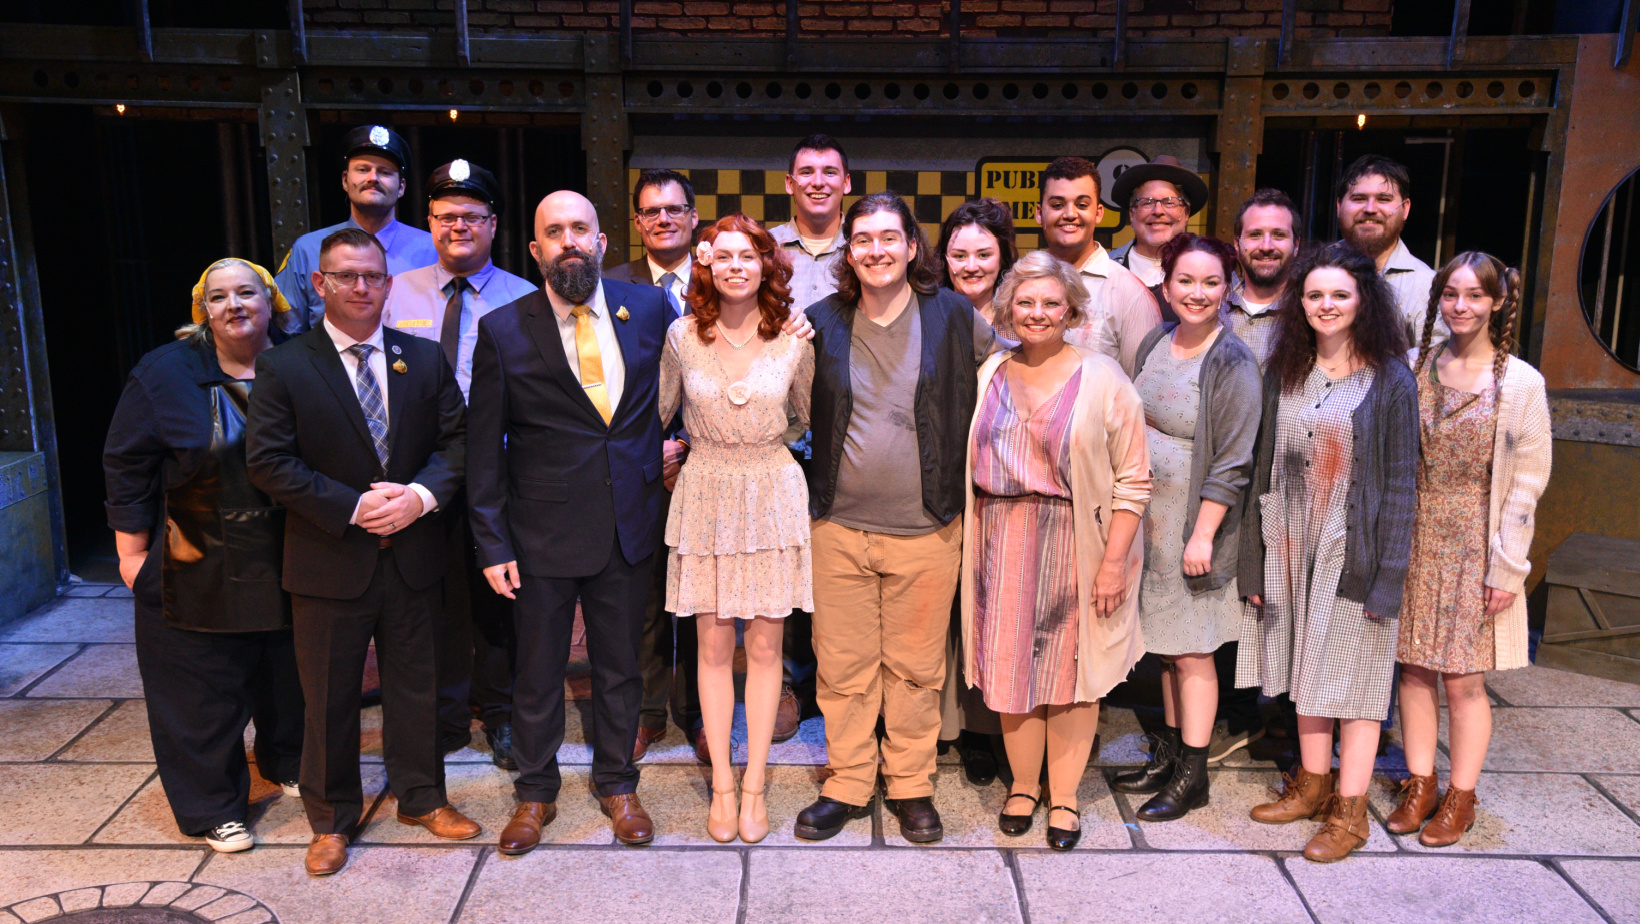 The Cast of Aurora Community Theatre's production of Urinetown: The Musical
Photo Credit: Jerry Hayes